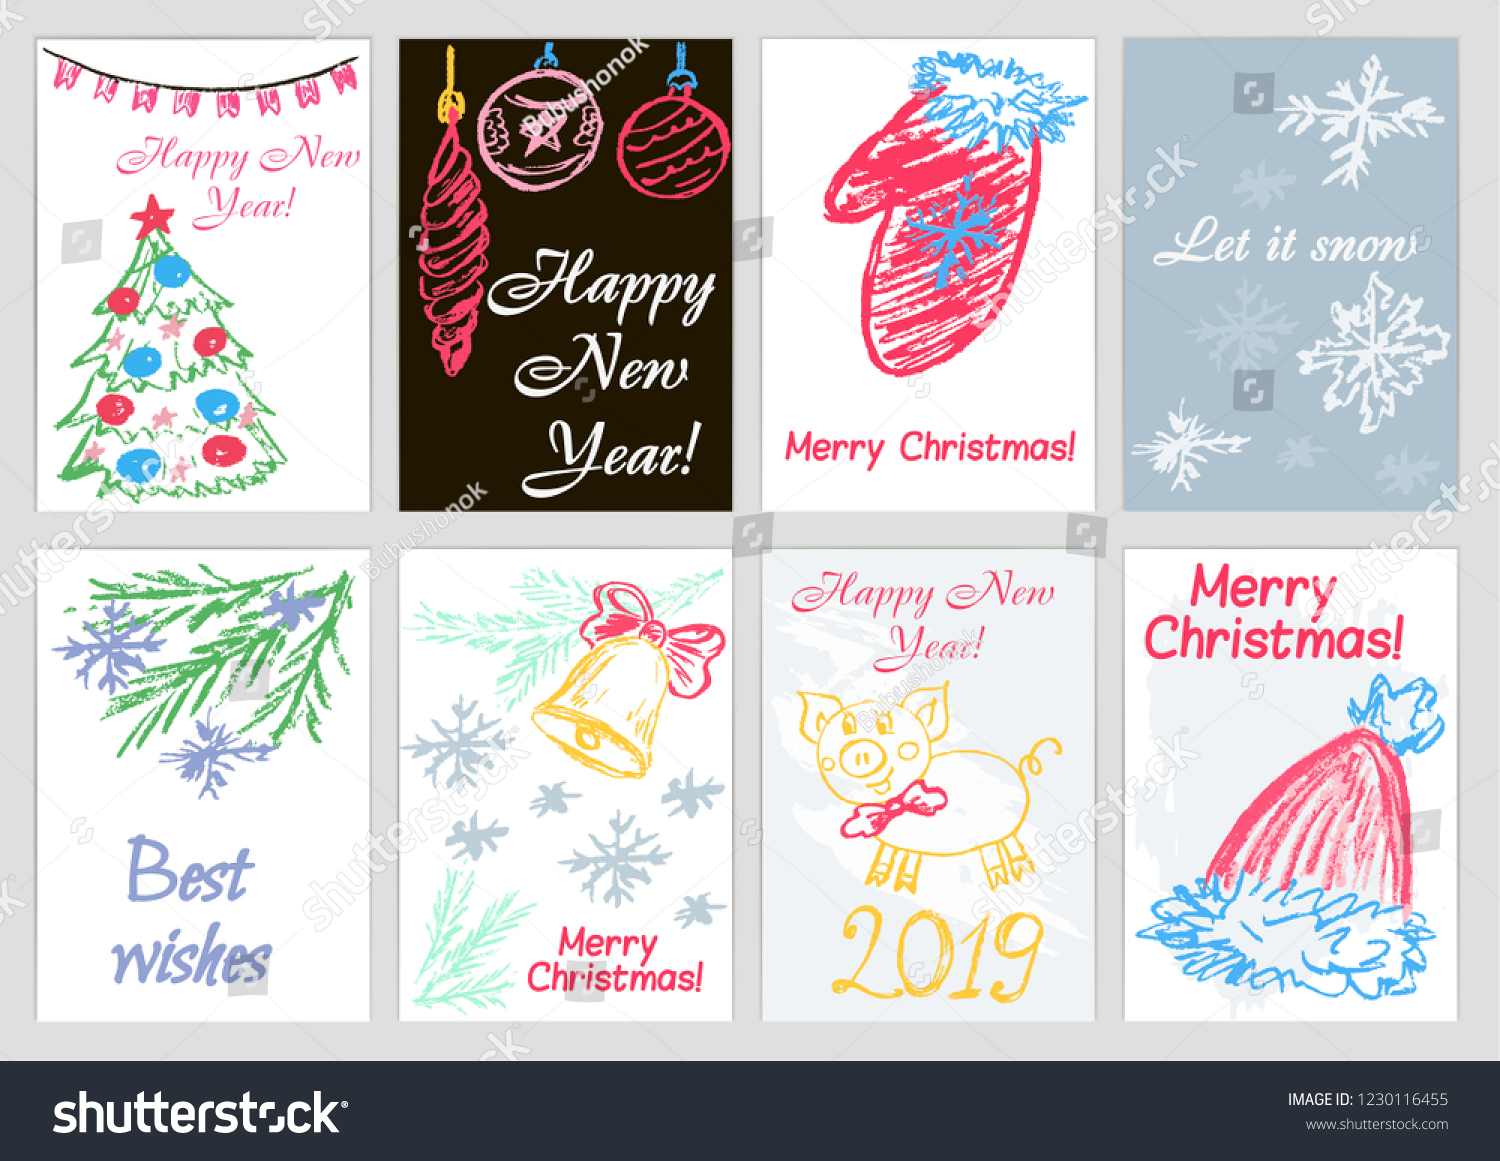 3dRose Stars and Curls Silver and Green set of 12 gc_62808_2 6 x 6 inches Happy New Year Greeting Cards 